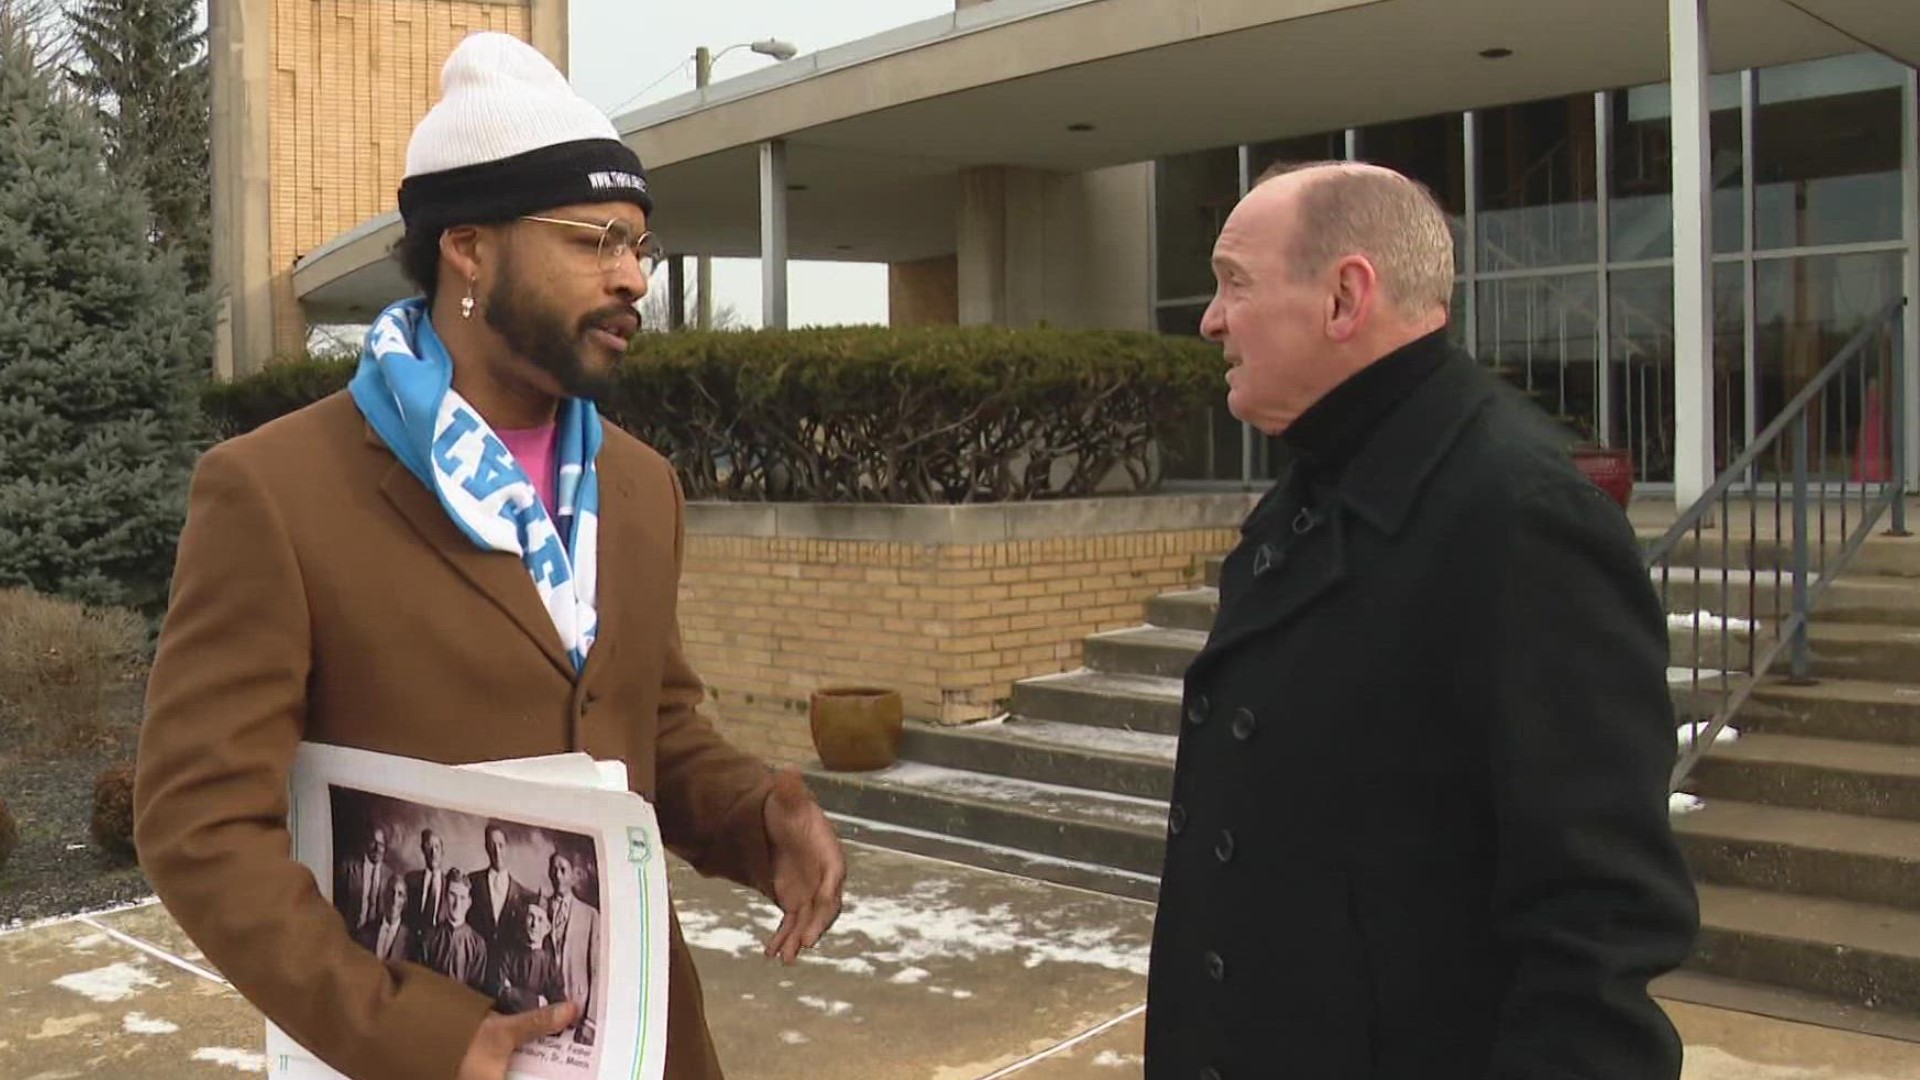 St. Rita Catholic Church is mother church of Indianapolis' Black Catholic community. Chuck Lofton got a chance to tour the area with guide Sampson Levingston.